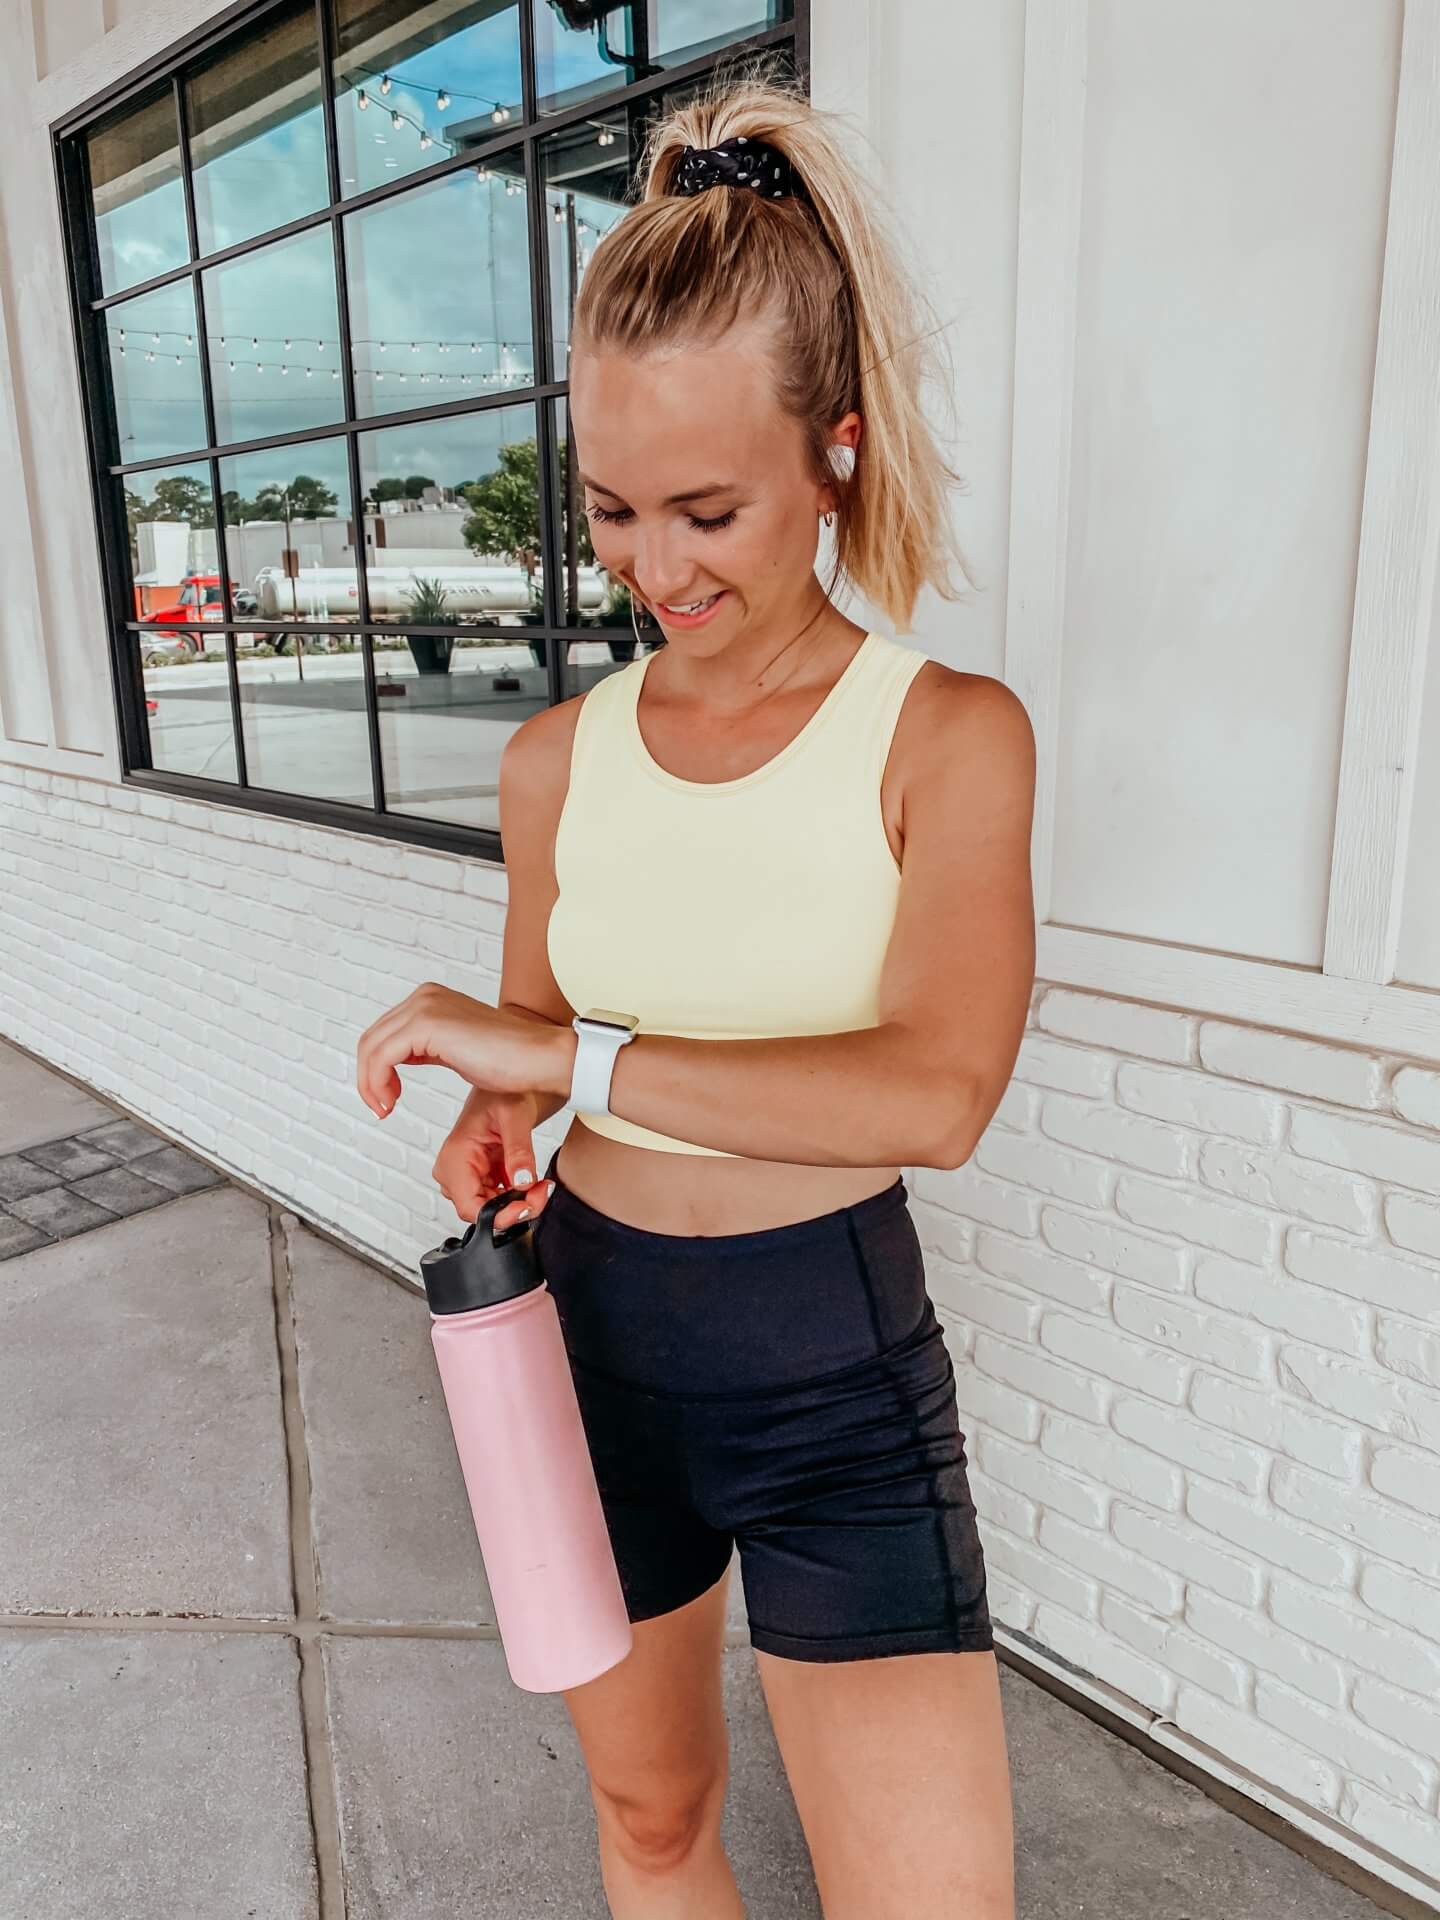 Must Have Workout Essentials. Everything you need for working out at home. My favorite workout essentials. The Blonder Life